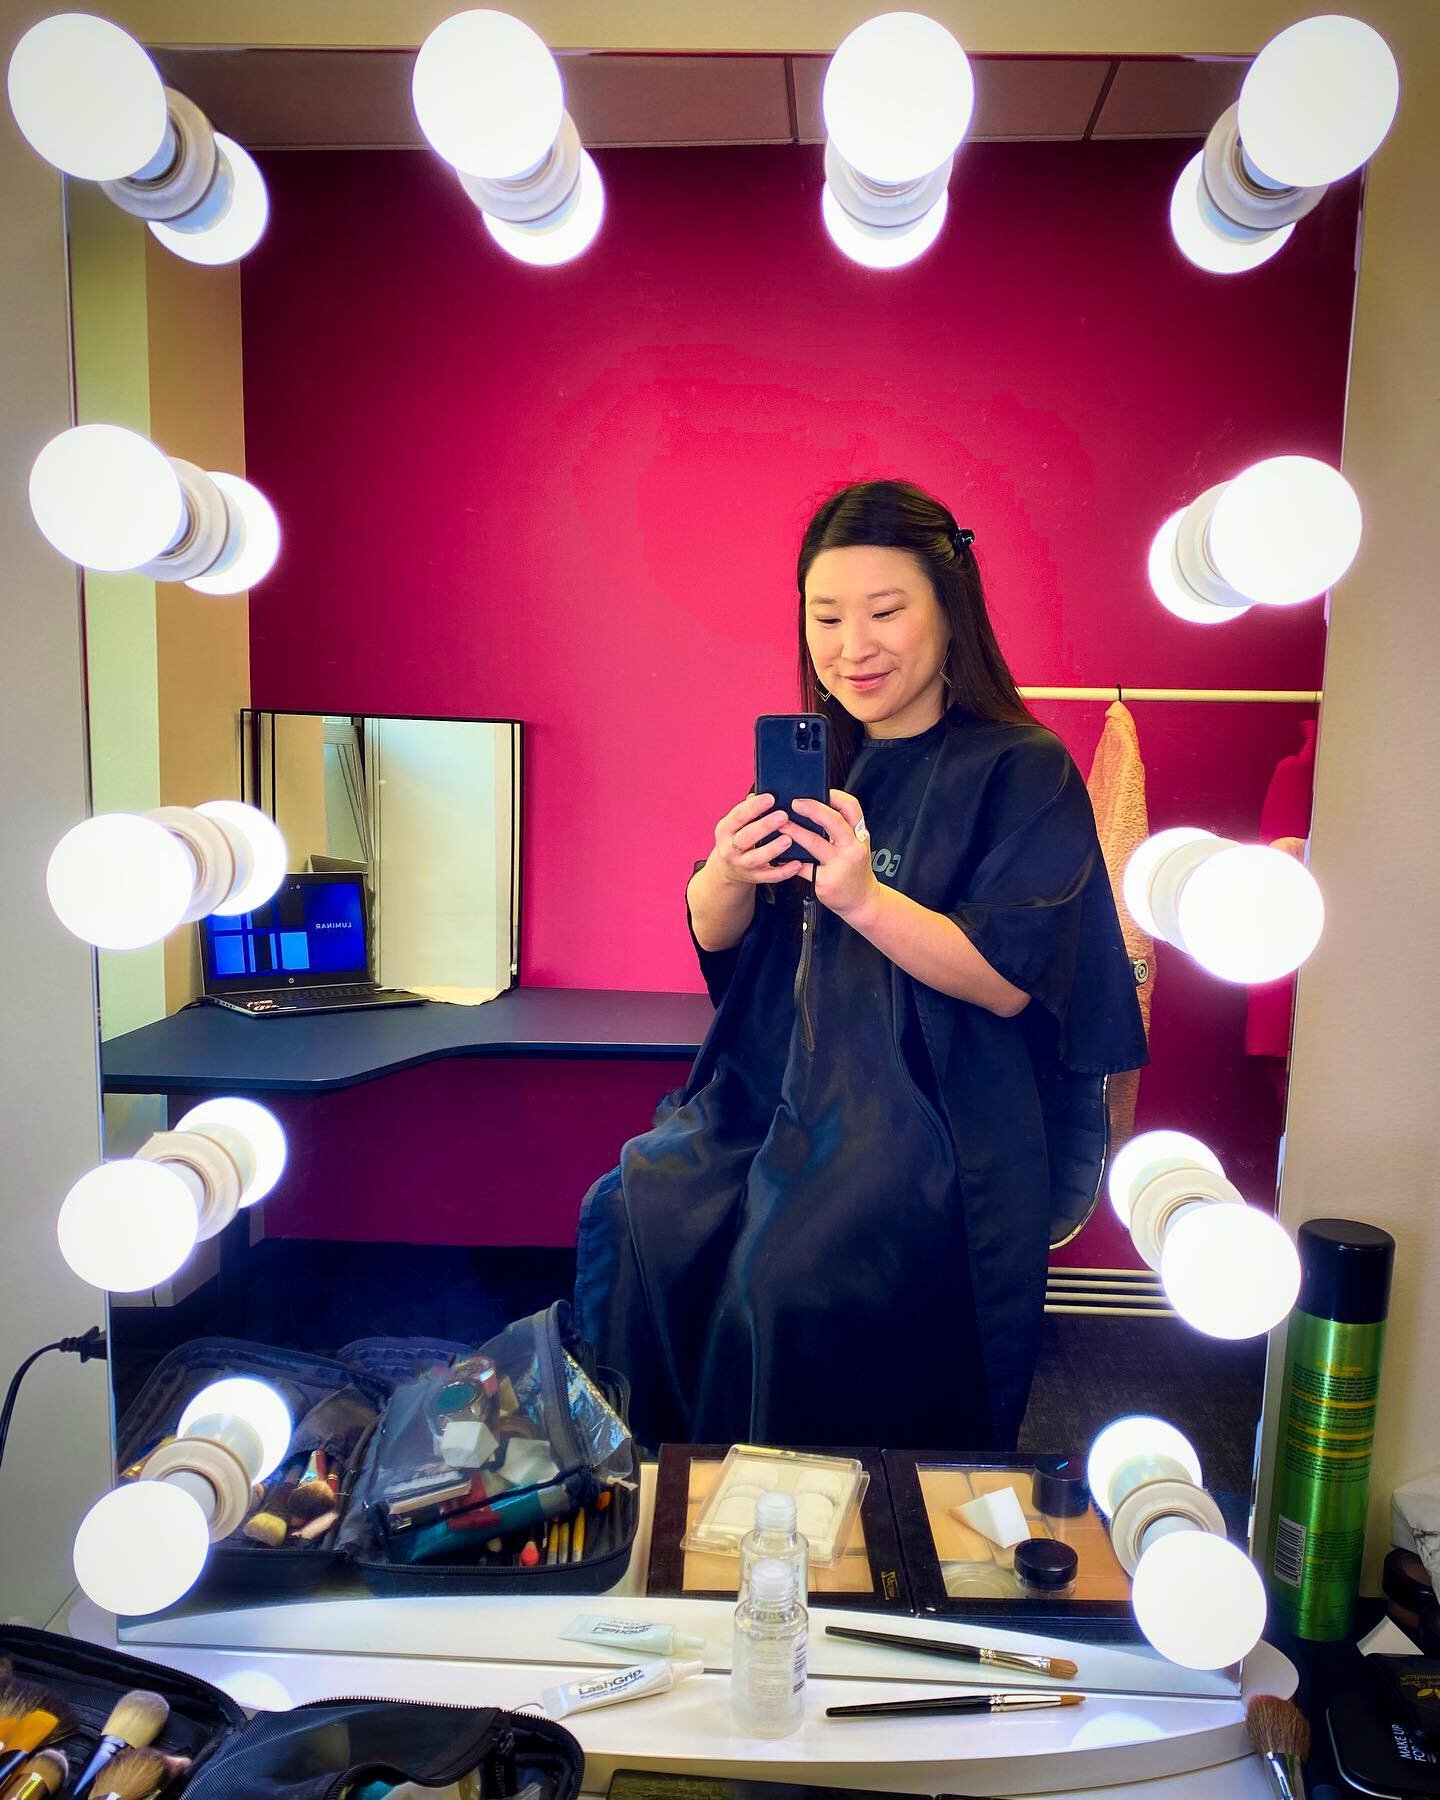 You know it&rsquo;s going to be a good day when your green room is painted PINK! 💗💗💗 

As on-camera talent, I do have a few demands...lol 😉 

Loved hosting #luminarlive and connecting with so many creative minds, virtually! We talked about digita